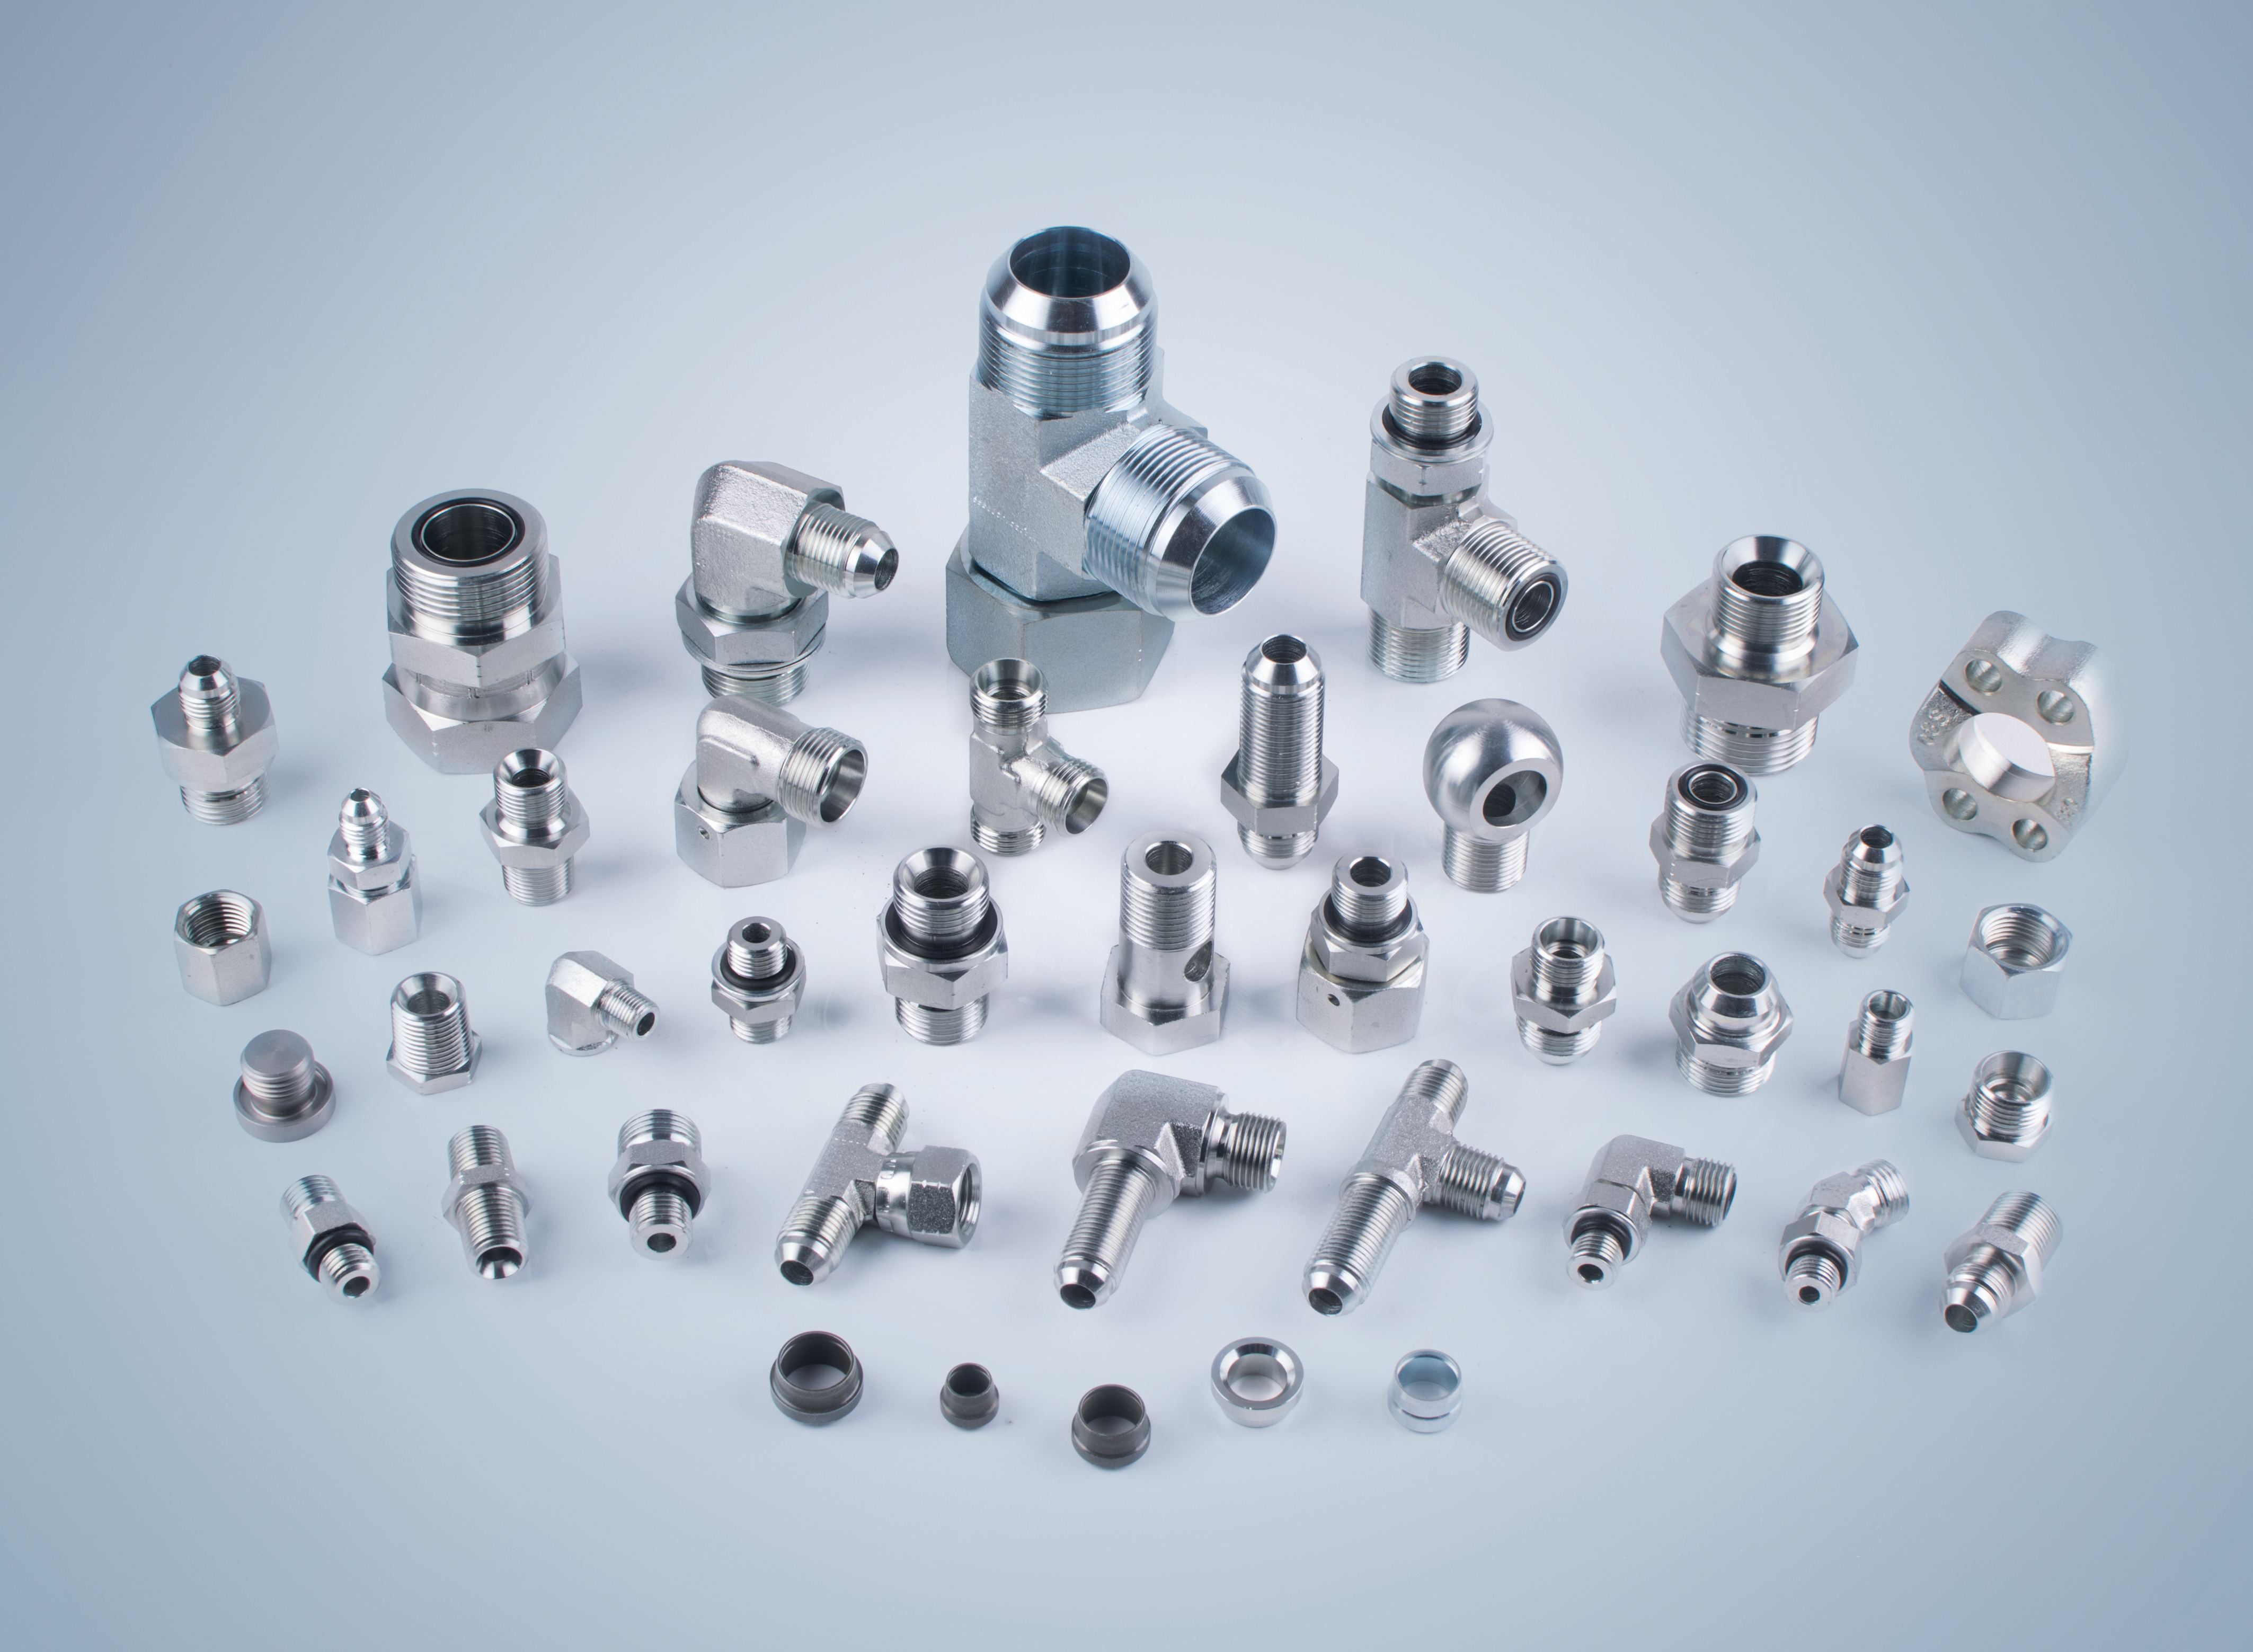 What are hydraulic fittings used for?